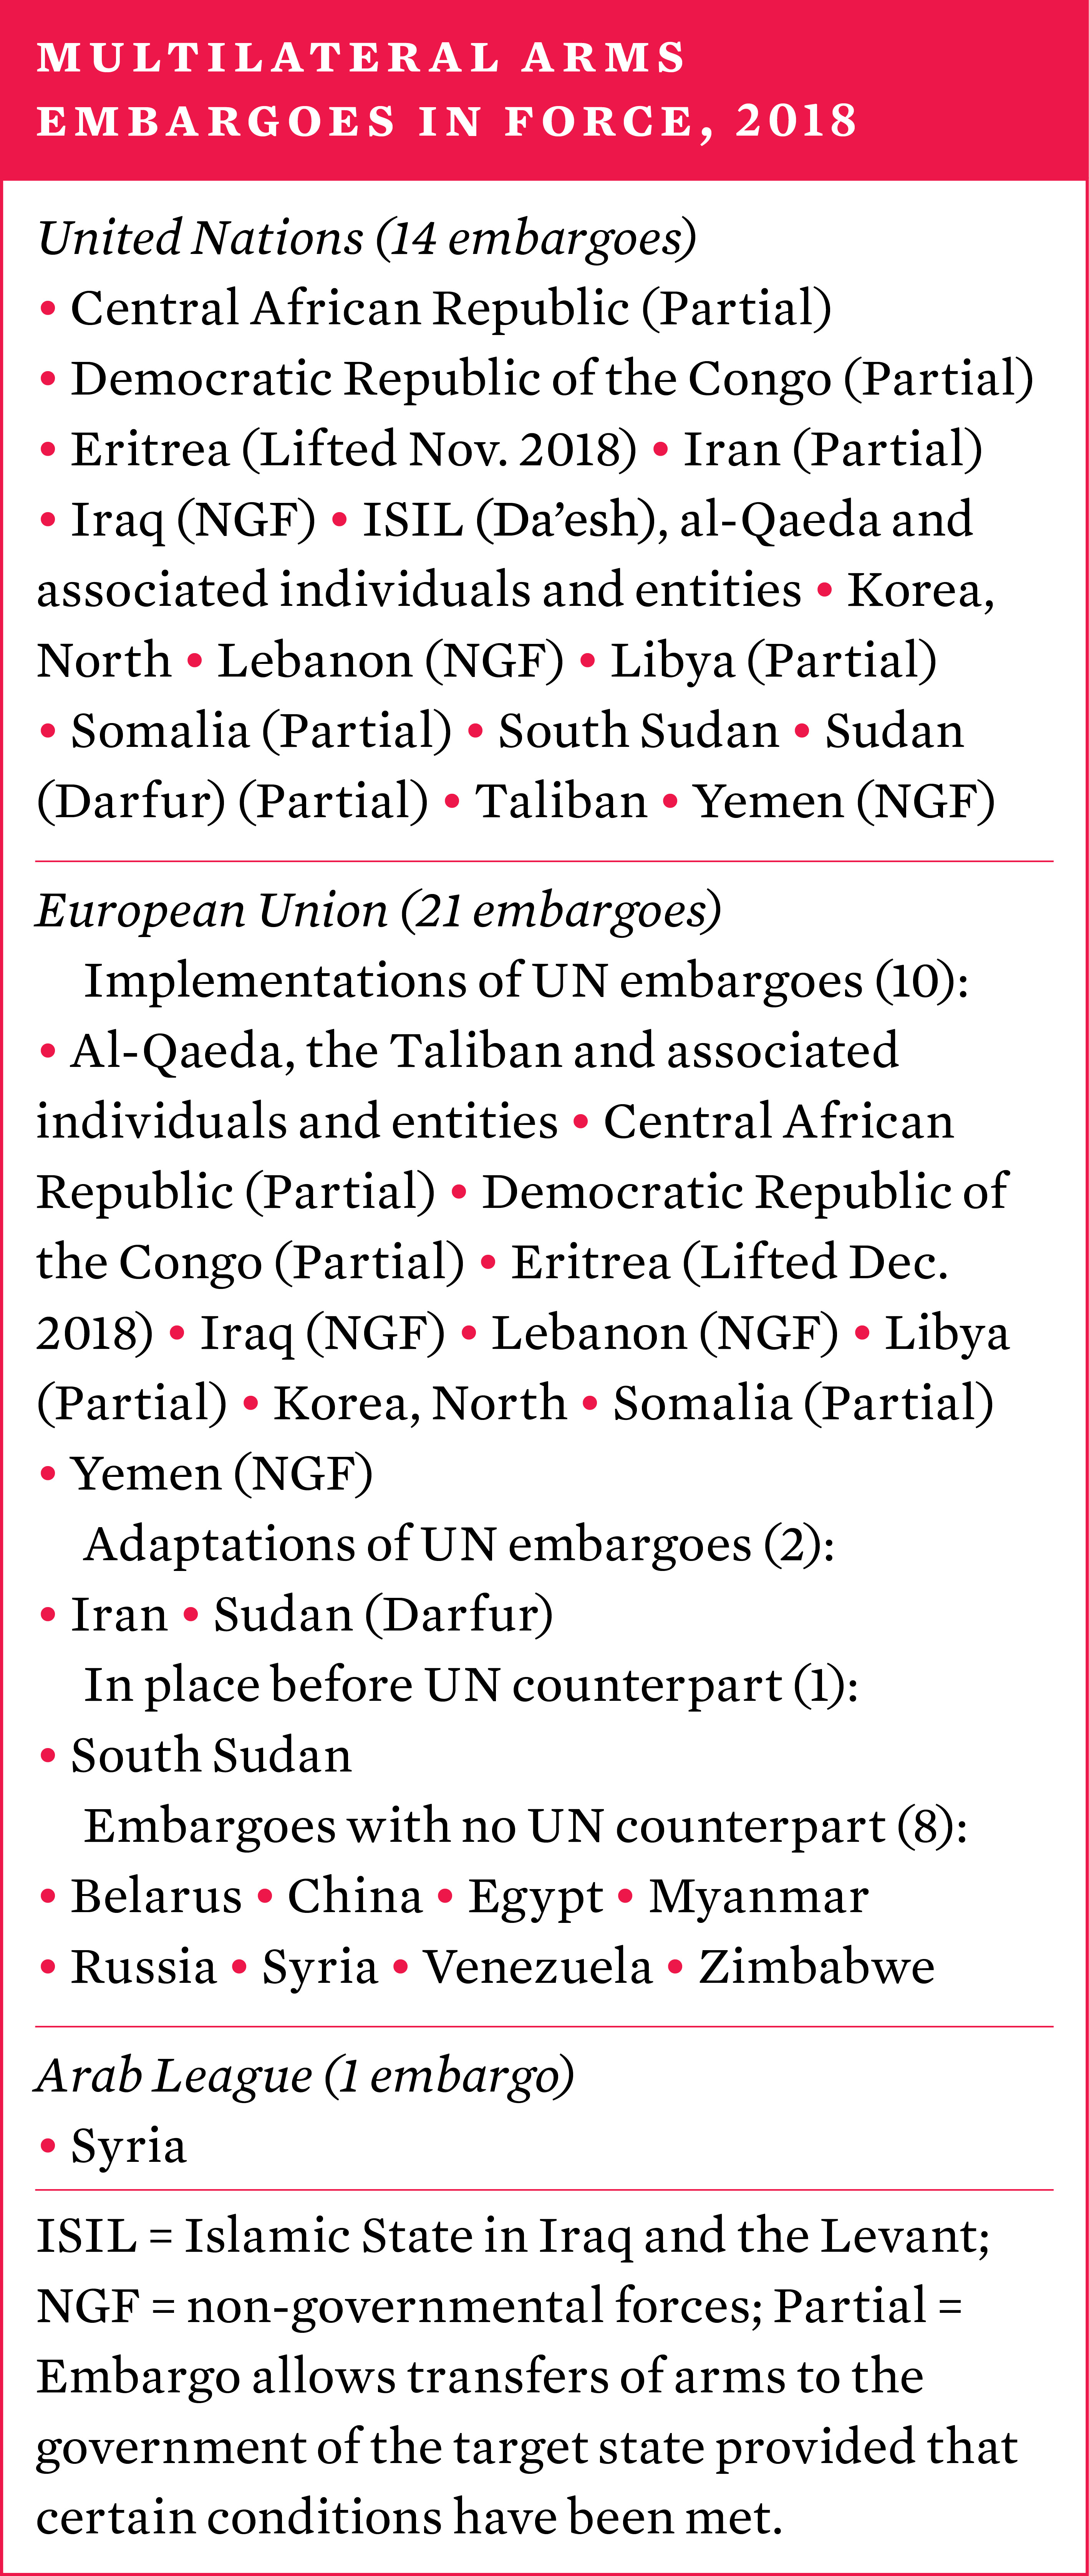 Multilateral arms embargoes in force, 2018